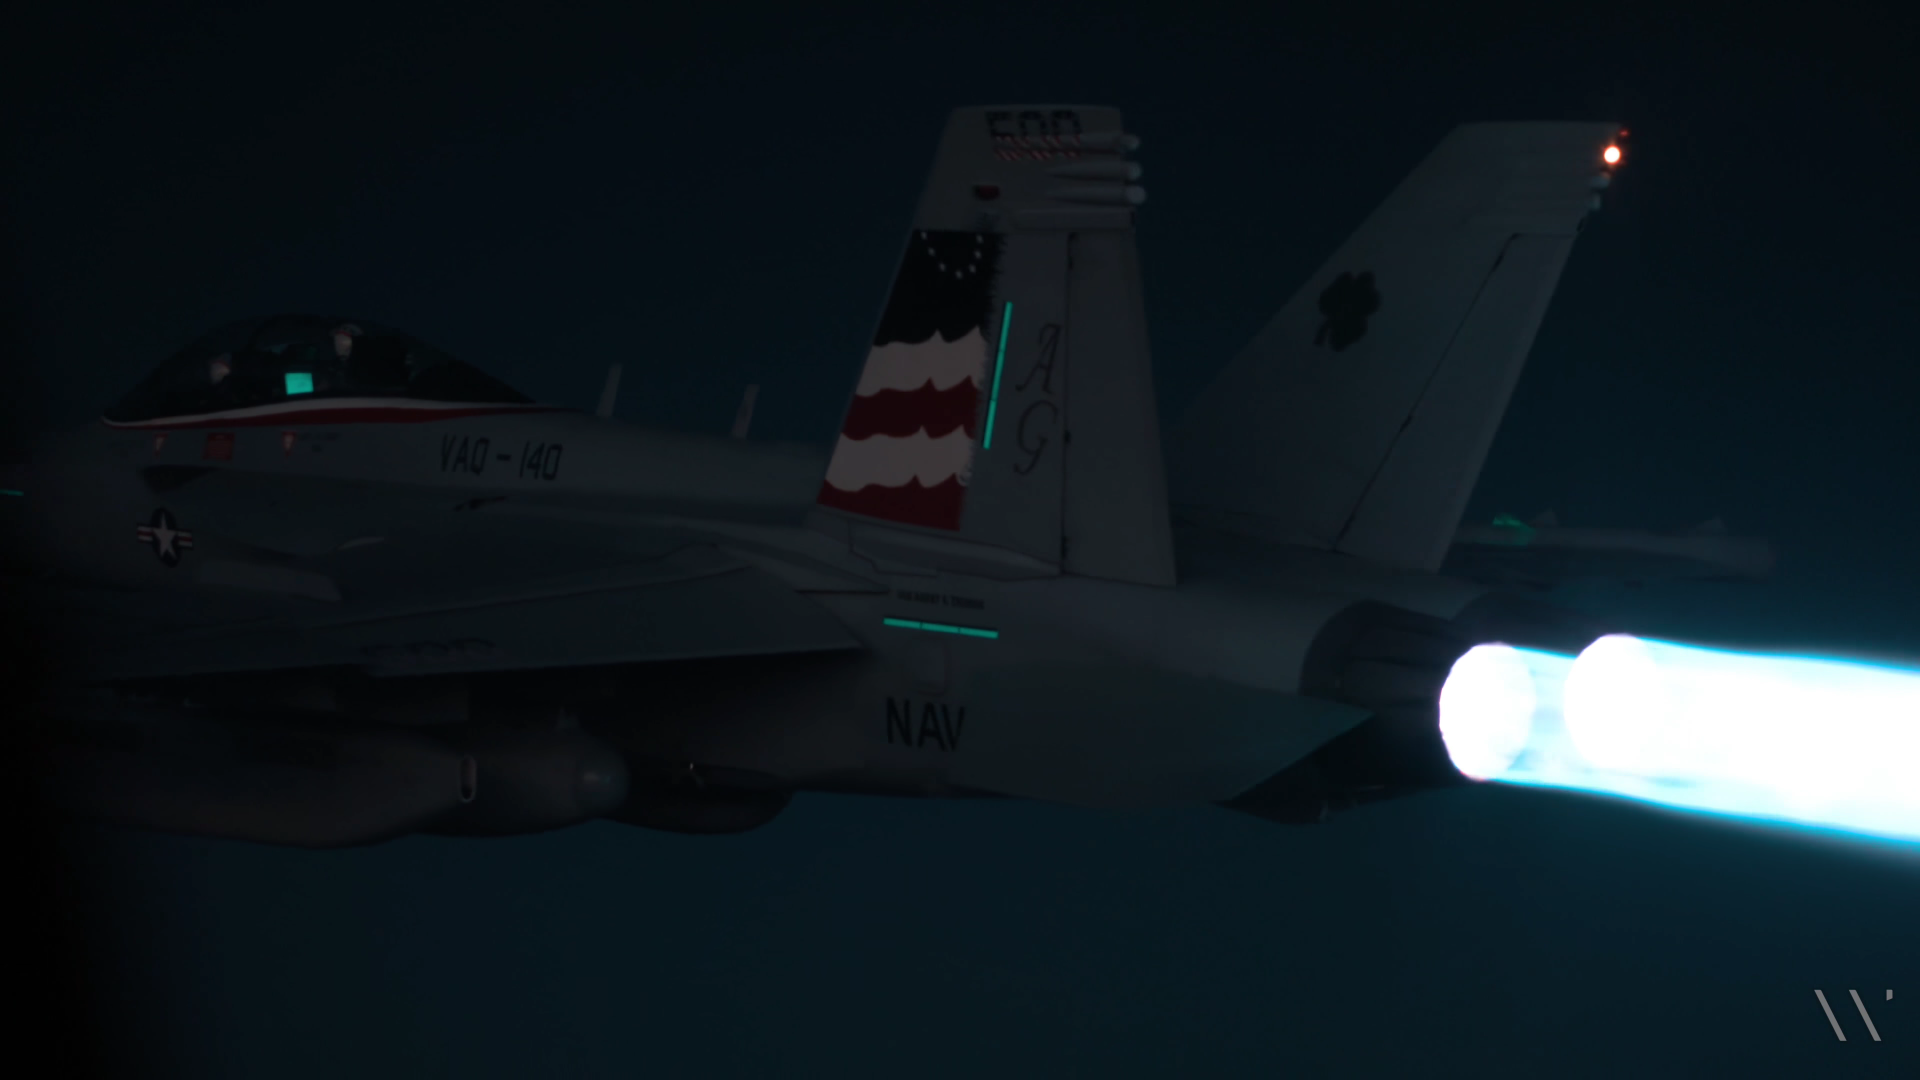 General 1920x1080 afterburner USN VAQ-140 504 Patriots United States Navy night jet fighter Multirole fighter military military aircraft military vehicle dark aircraft McDonnell Douglas F/A-18 Hornet McDonnell Douglas American aircraft